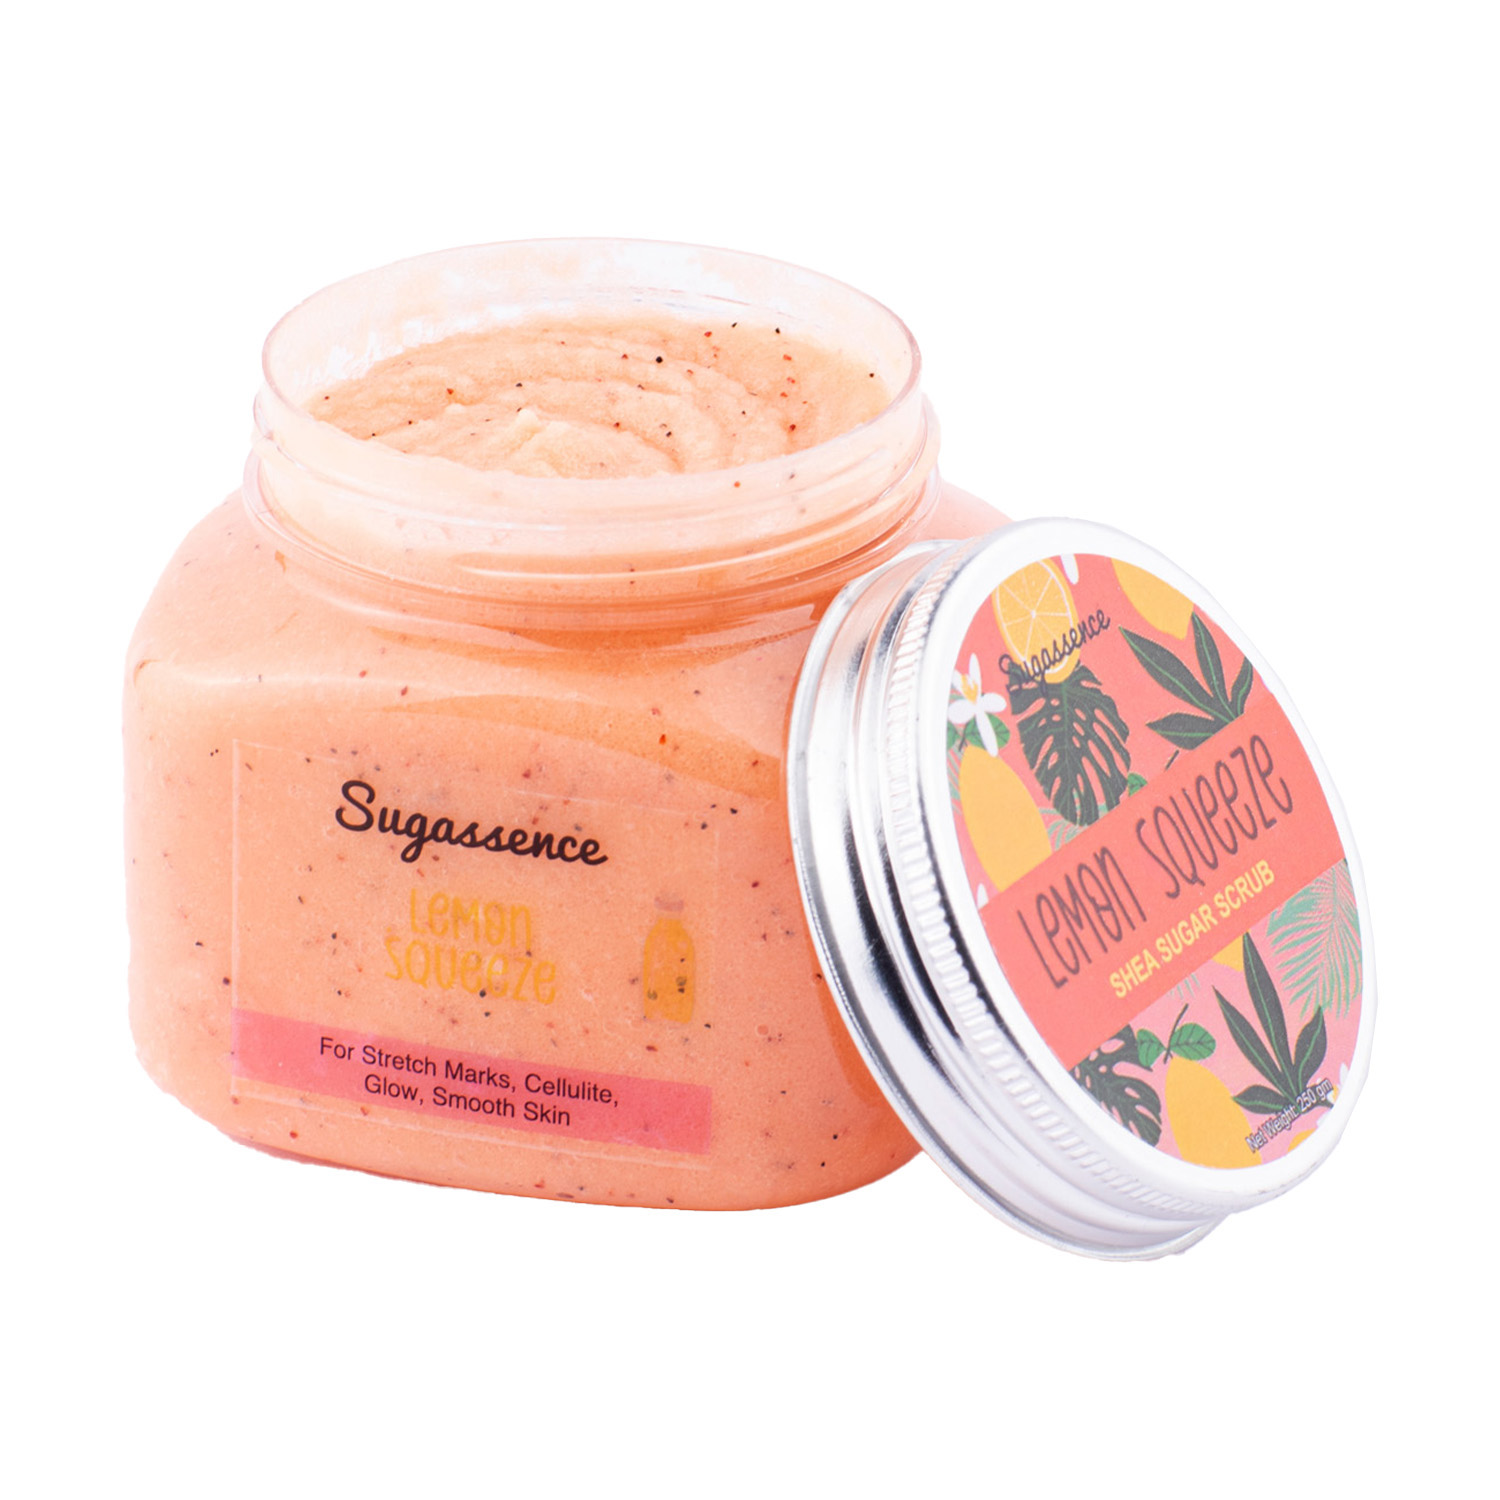 Sugassence Lemon Squeeze - Shea Sugar Scrub - Stretch Marks, Cellulite and Get that Perfect Glow, 250gm